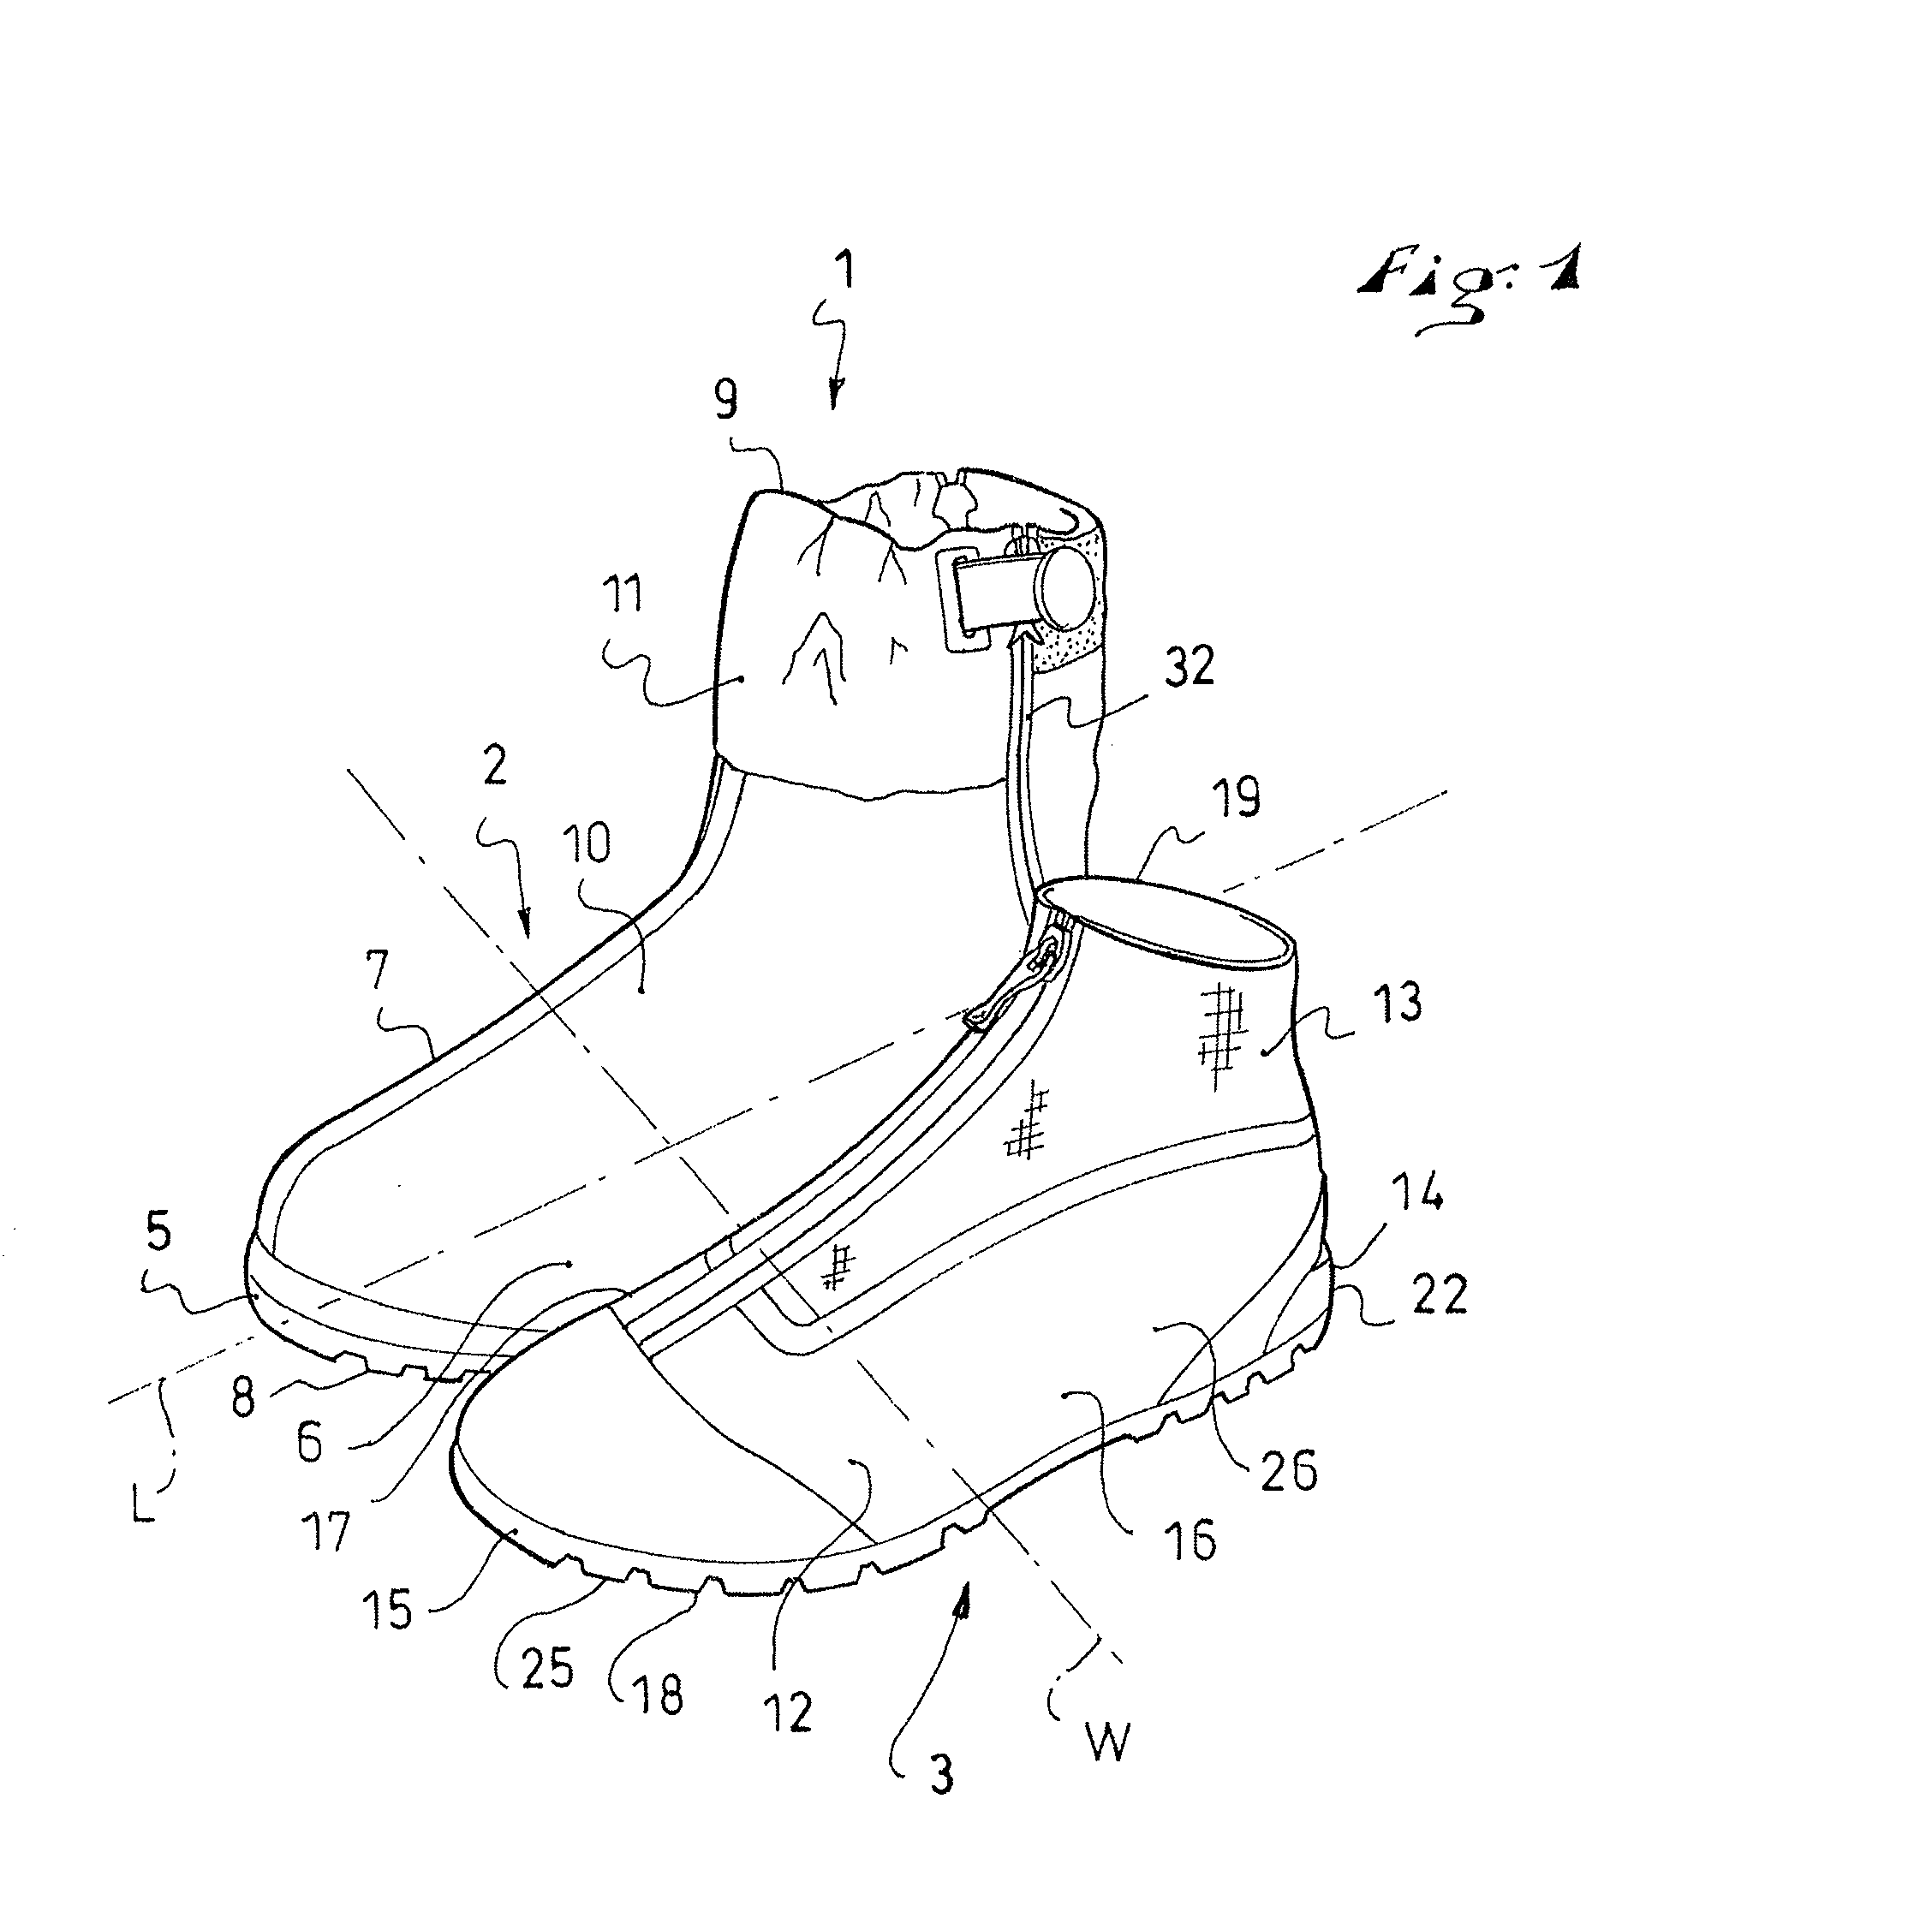 Boot having a first footwear element and a second footwear element